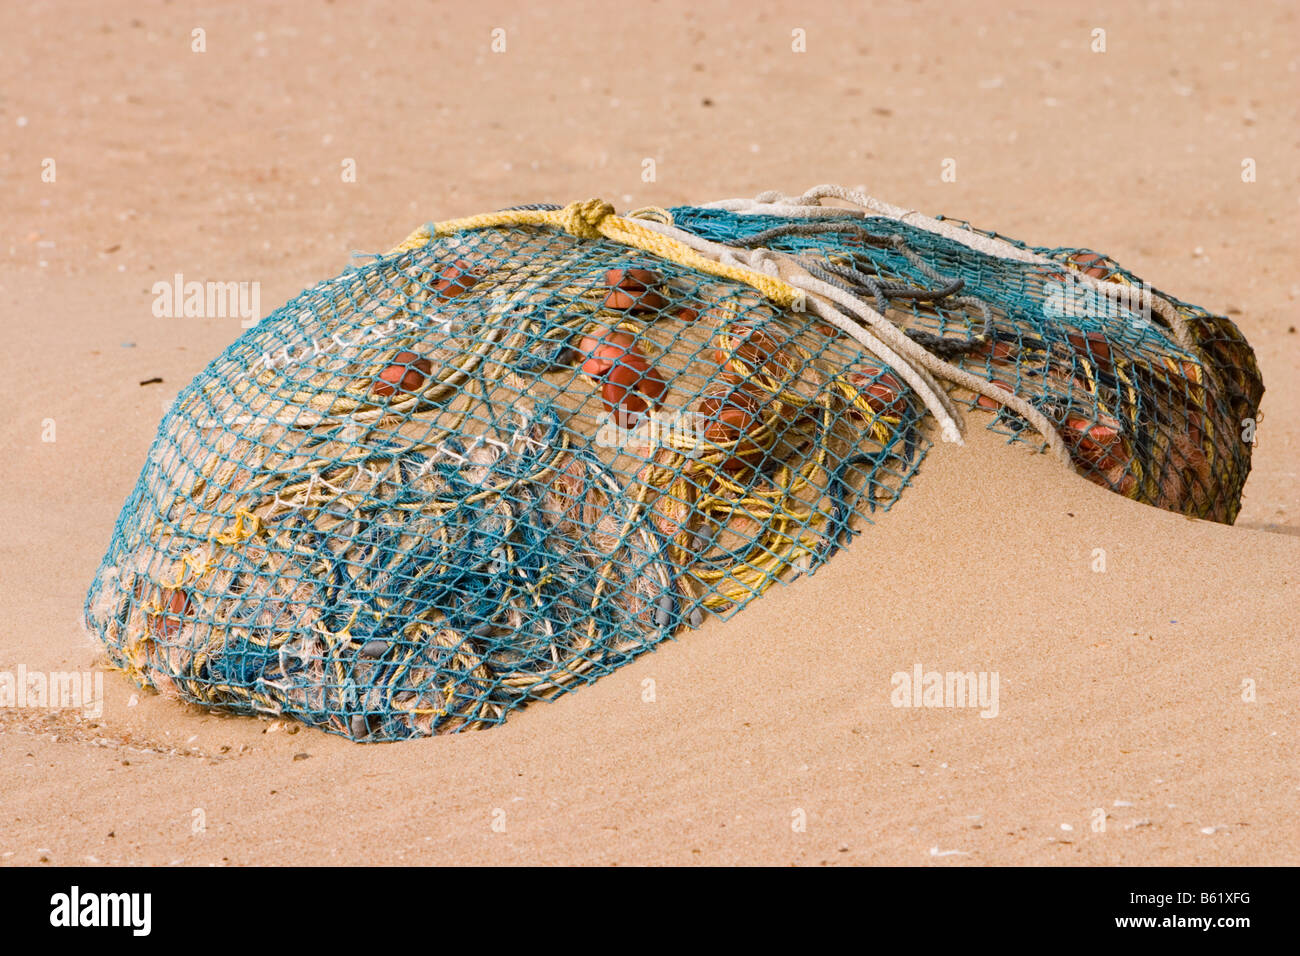 Commercial seine fishing net lying on beach sand at the Marina